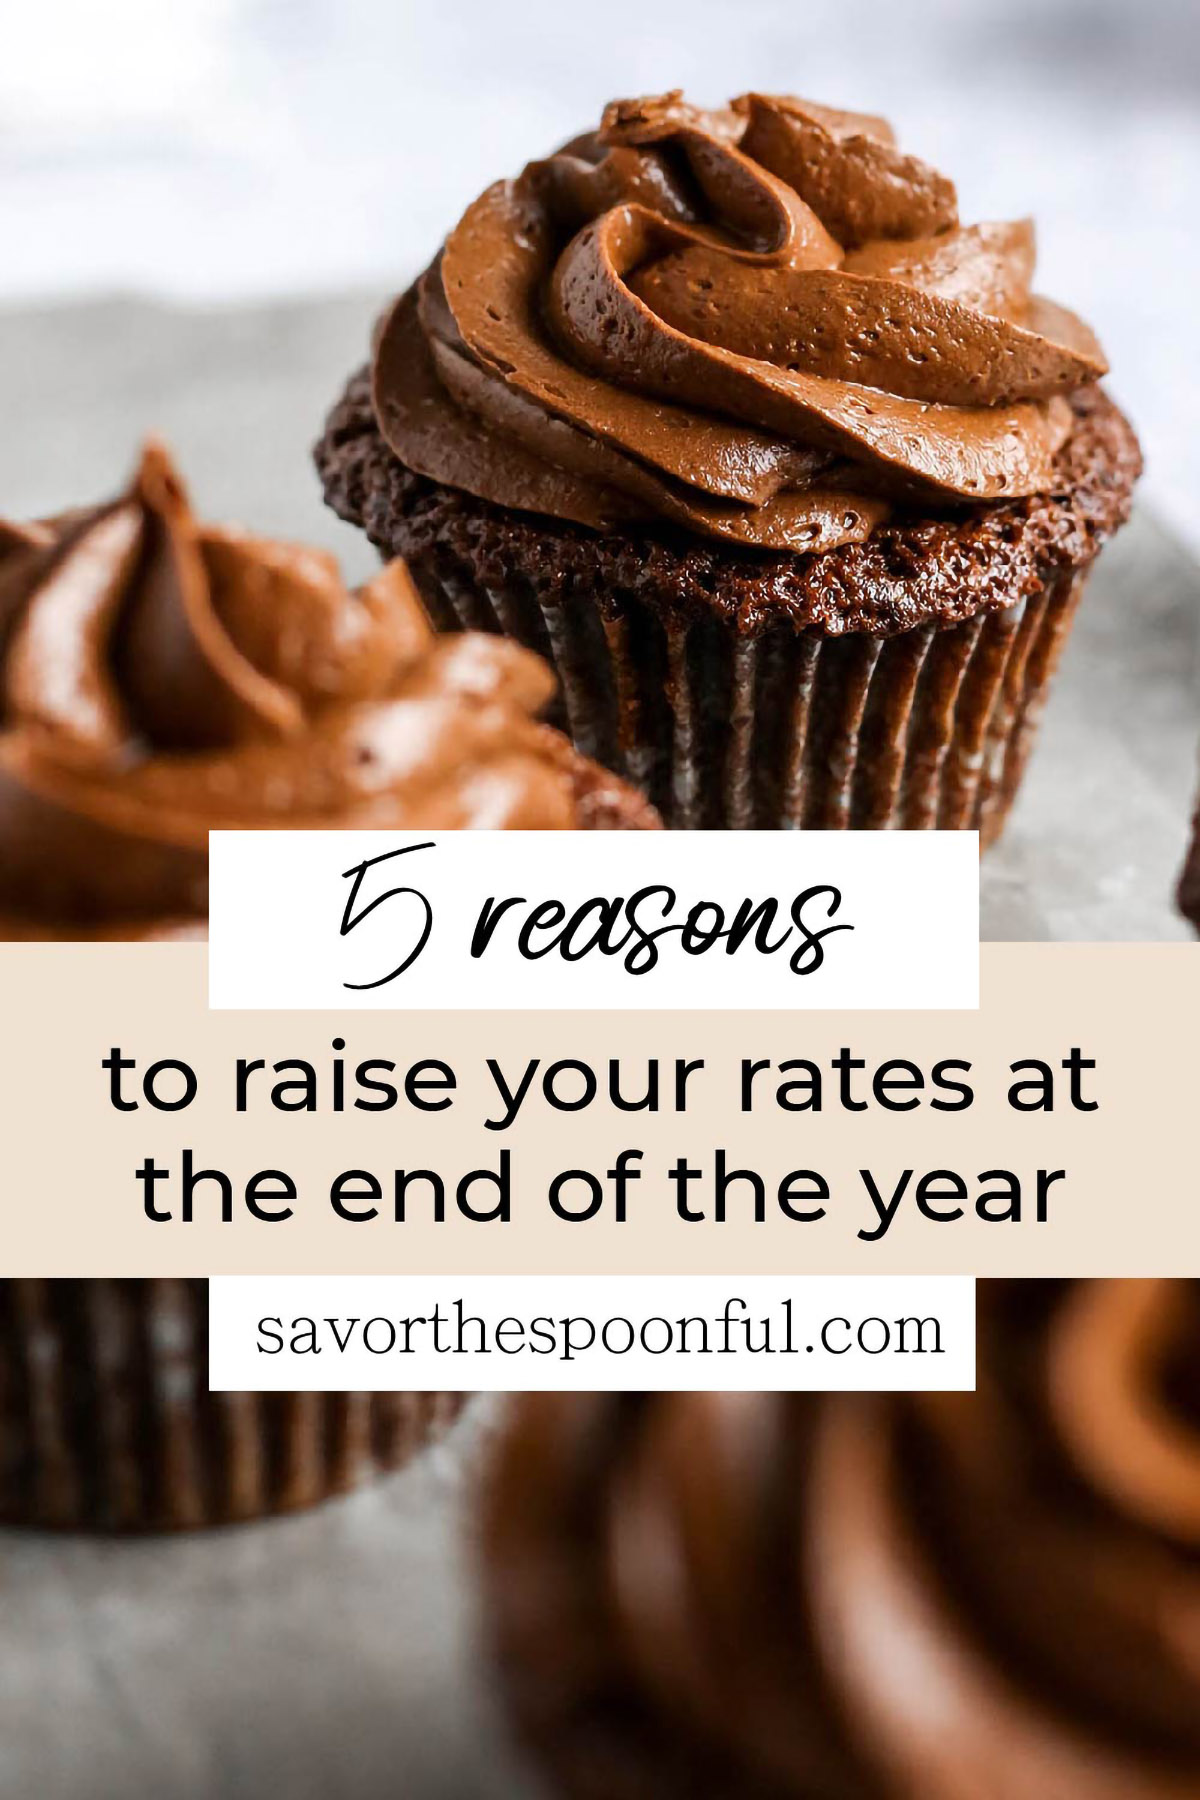 a graphic image of cupcakes with text overlay stating, "5 reasons to raise your rates at the end of the year"